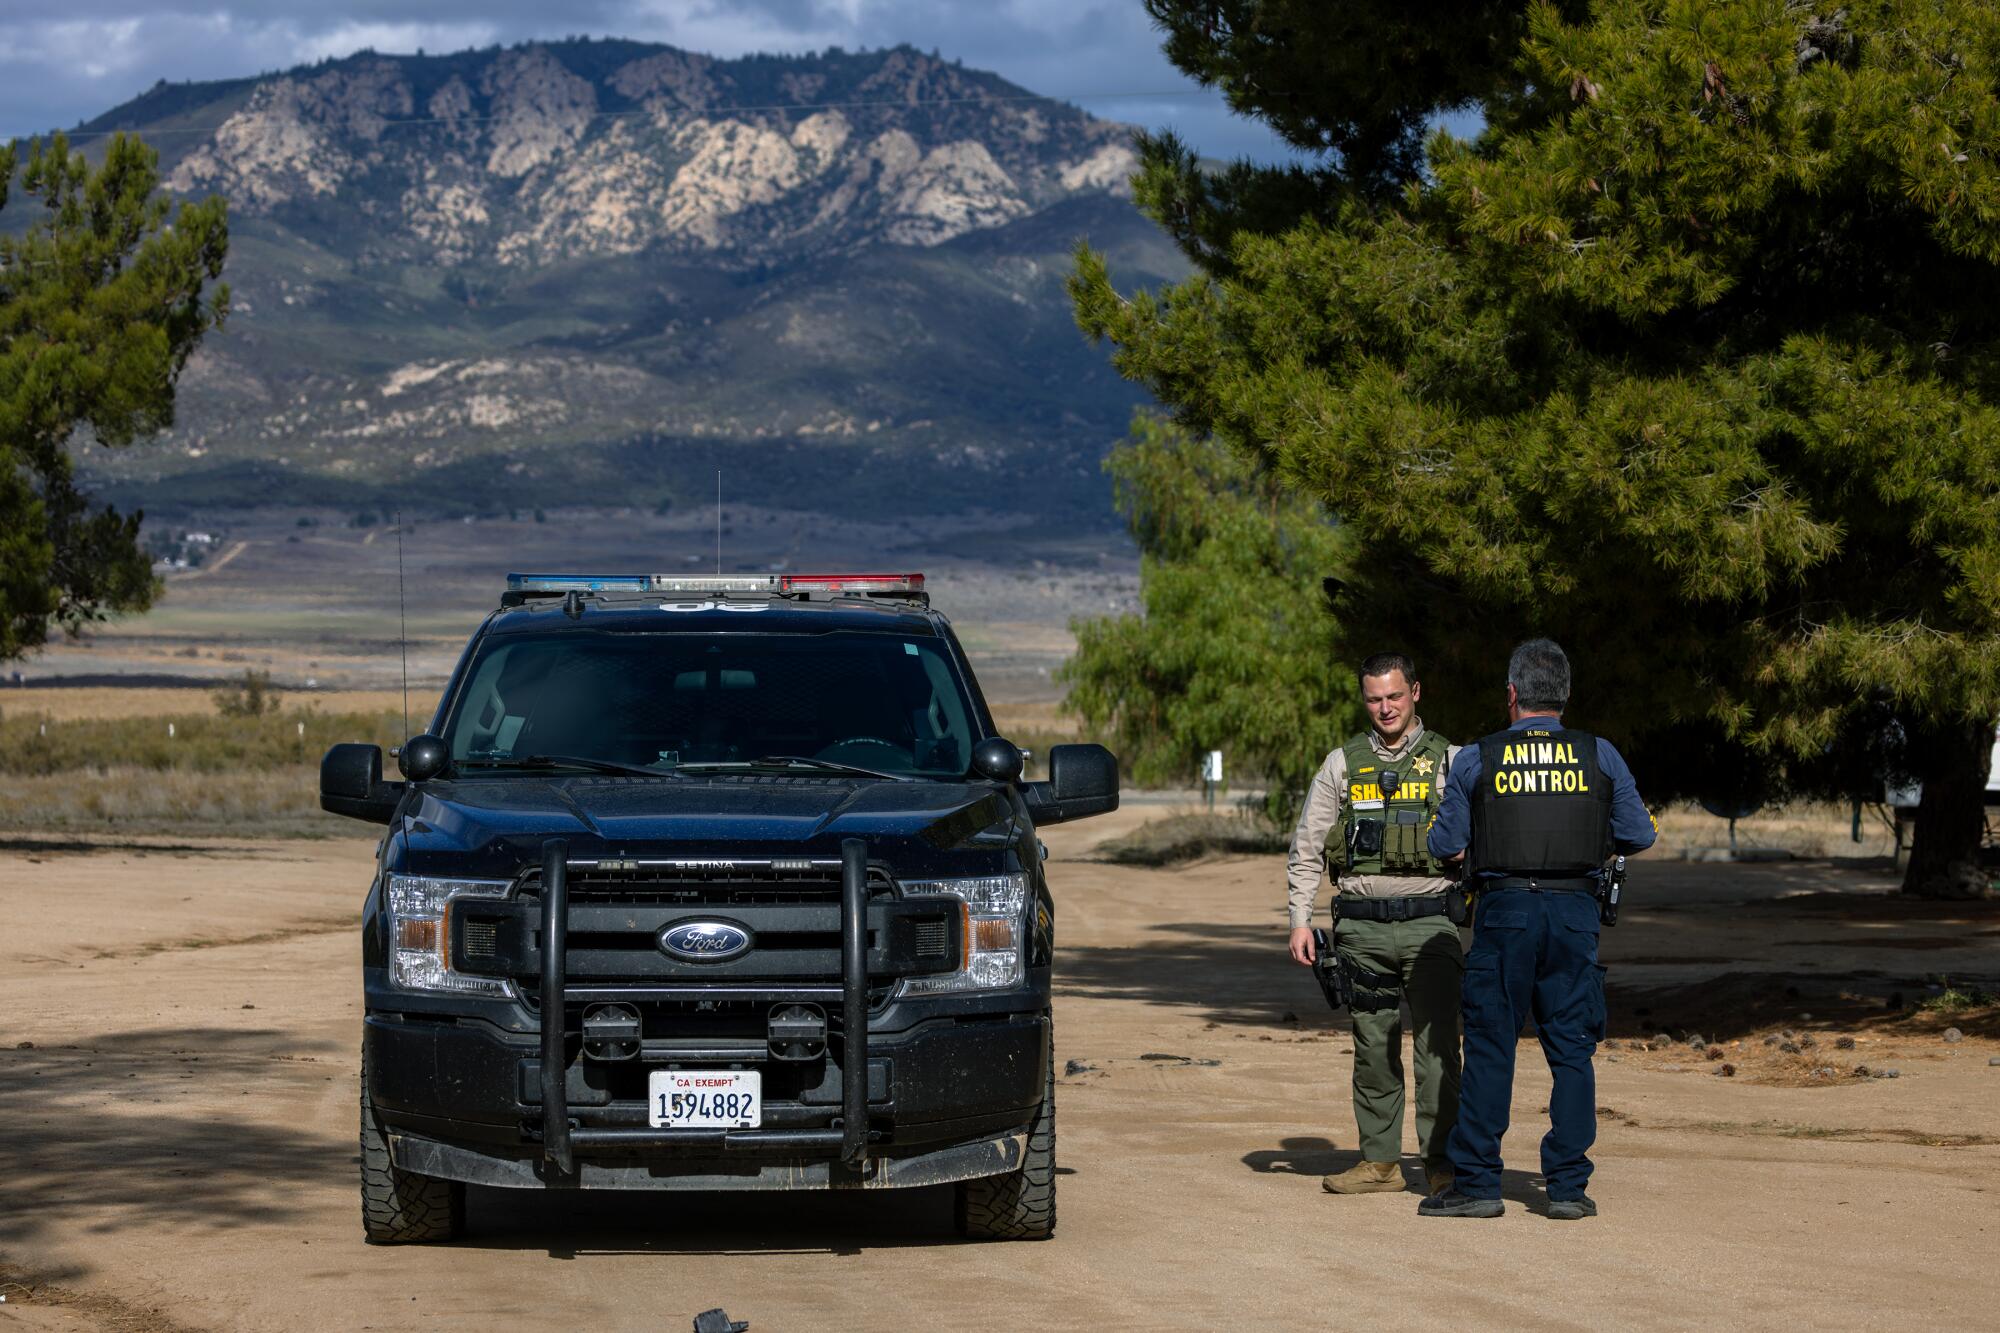 An animal control officer and a sheriff's deputy stand next to a patrol car as a mountain rises in the background.